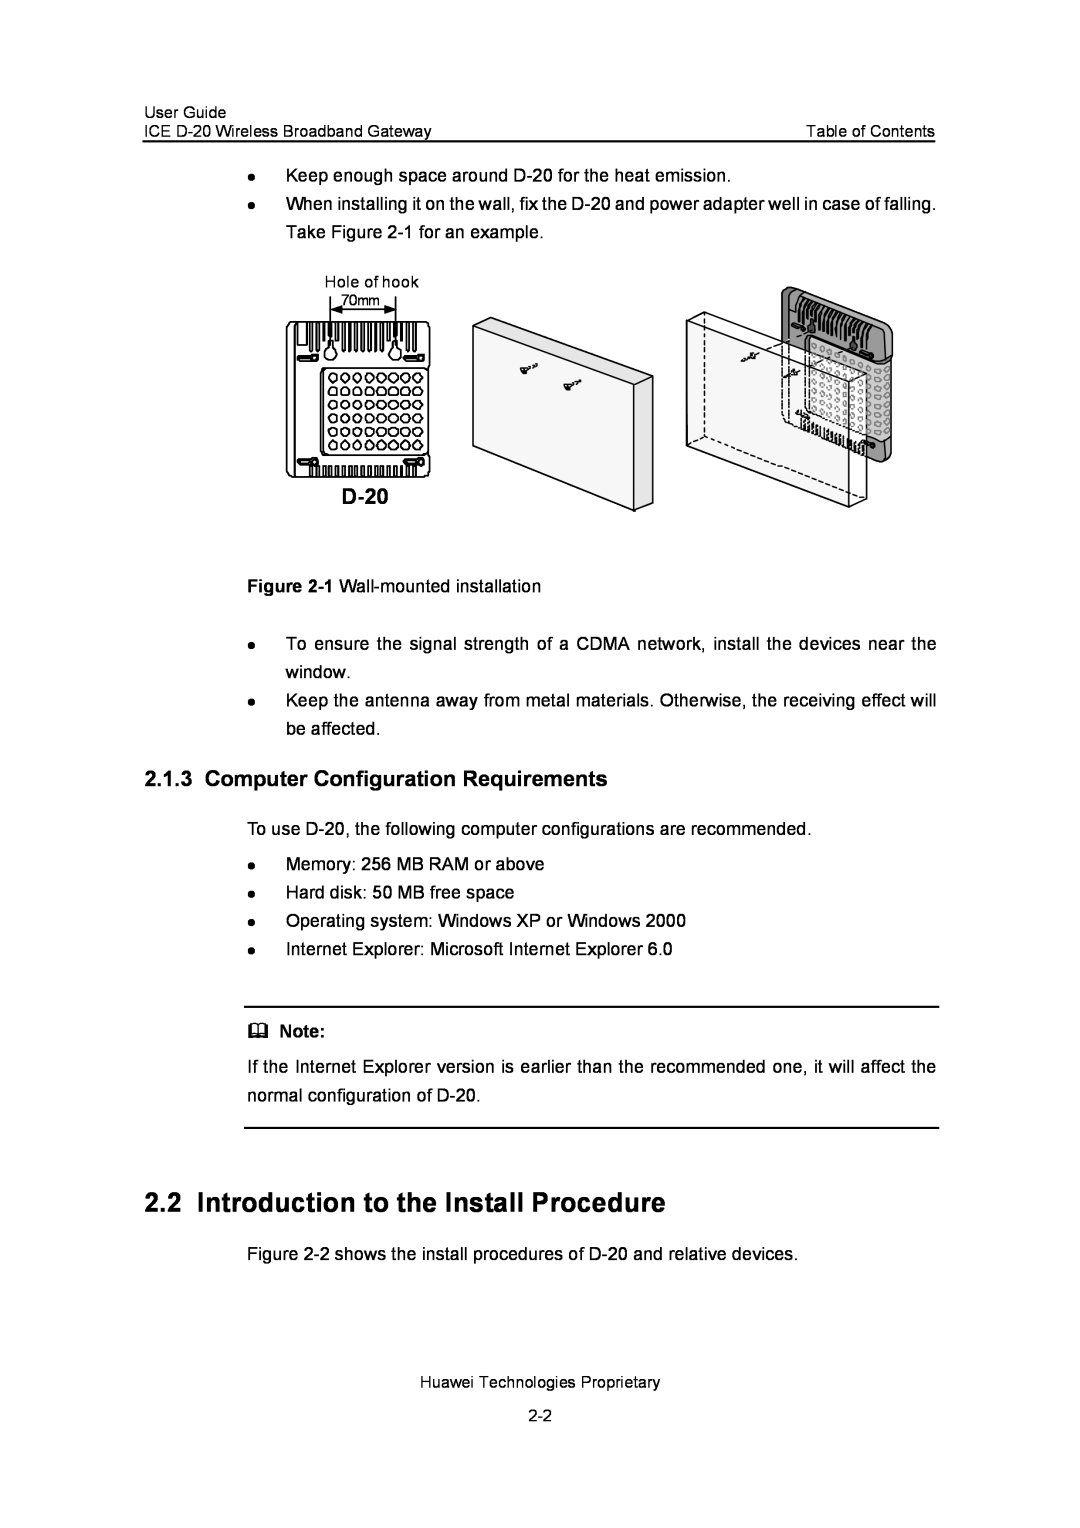 Insignia ICE D-20 EC506 manual Introduction to the Install Procedure, Computer Configuration Requirements 